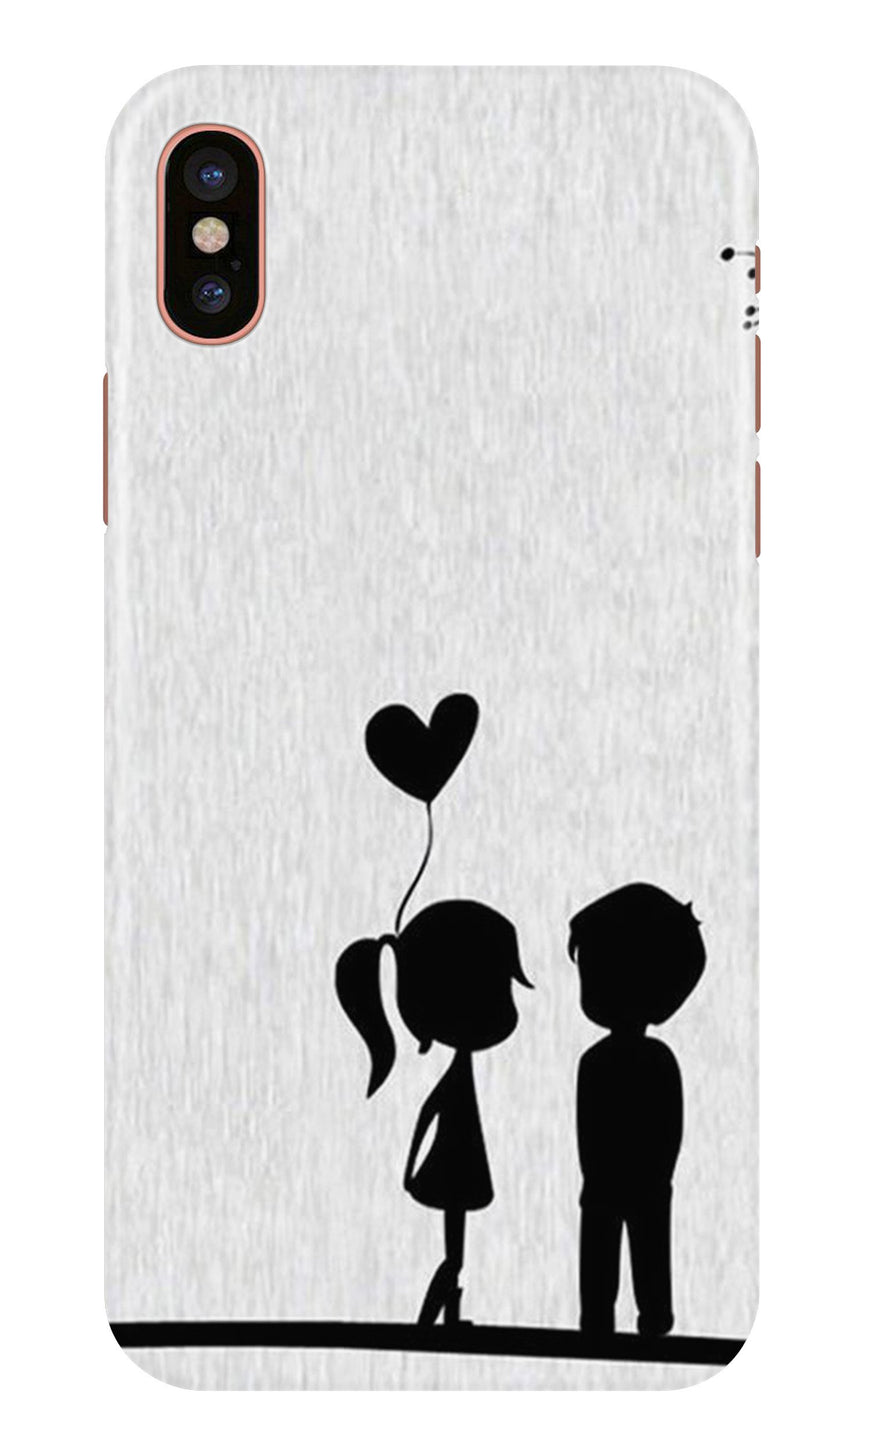 Cute Kid Couple Case for iPhone Xs Max (Design No. 283)